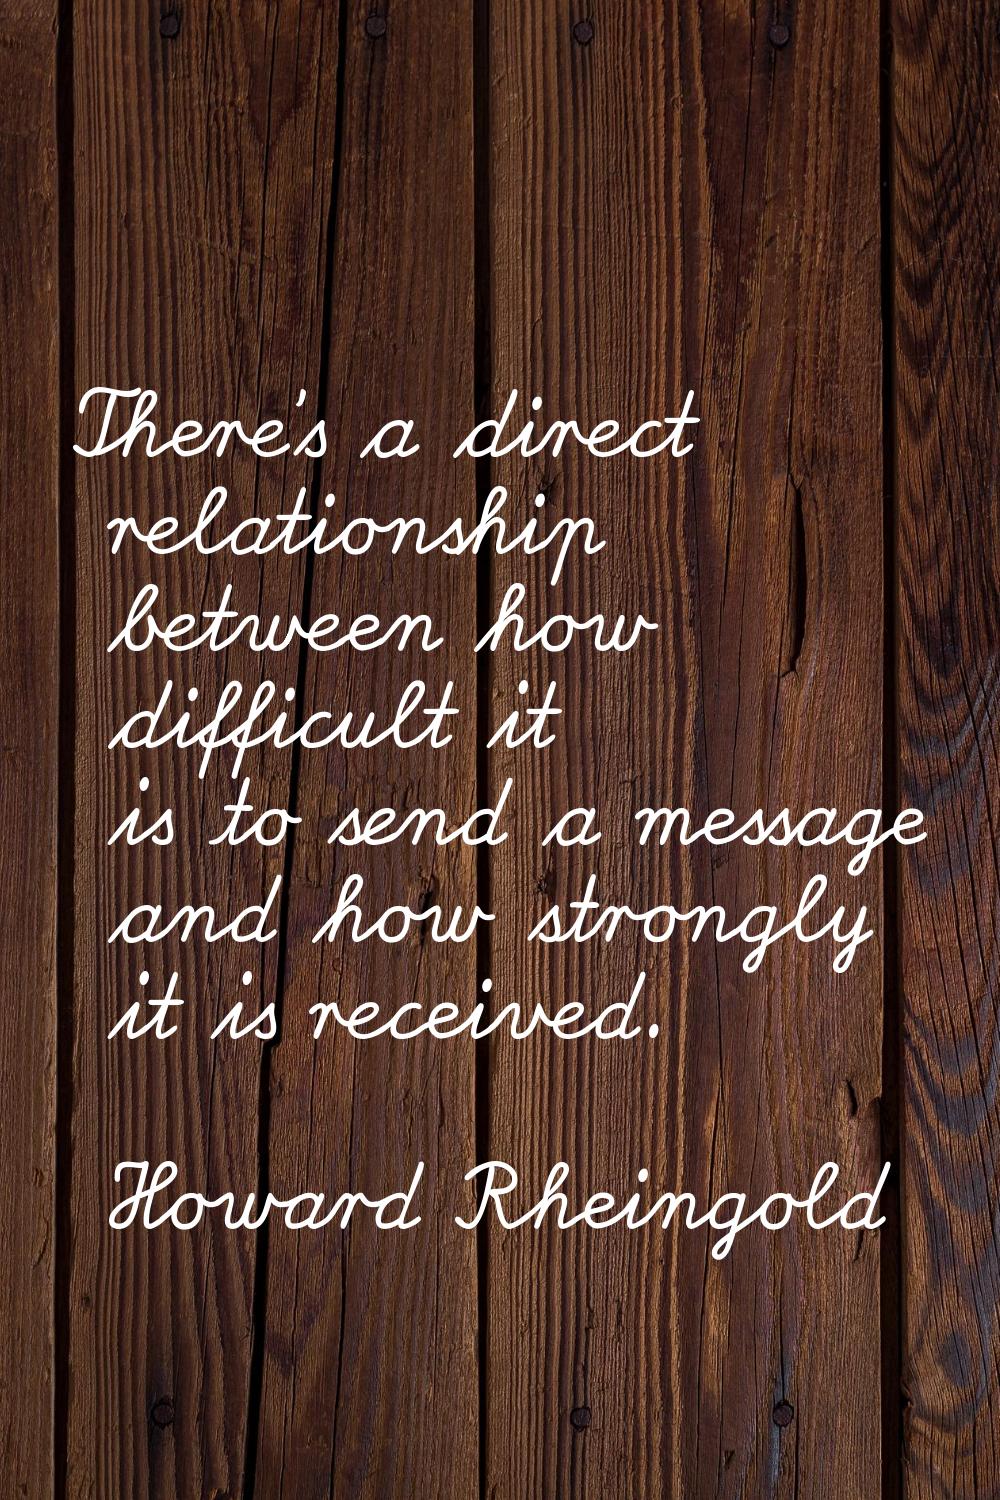 There's a direct relationship between how difficult it is to send a message and how strongly it is 